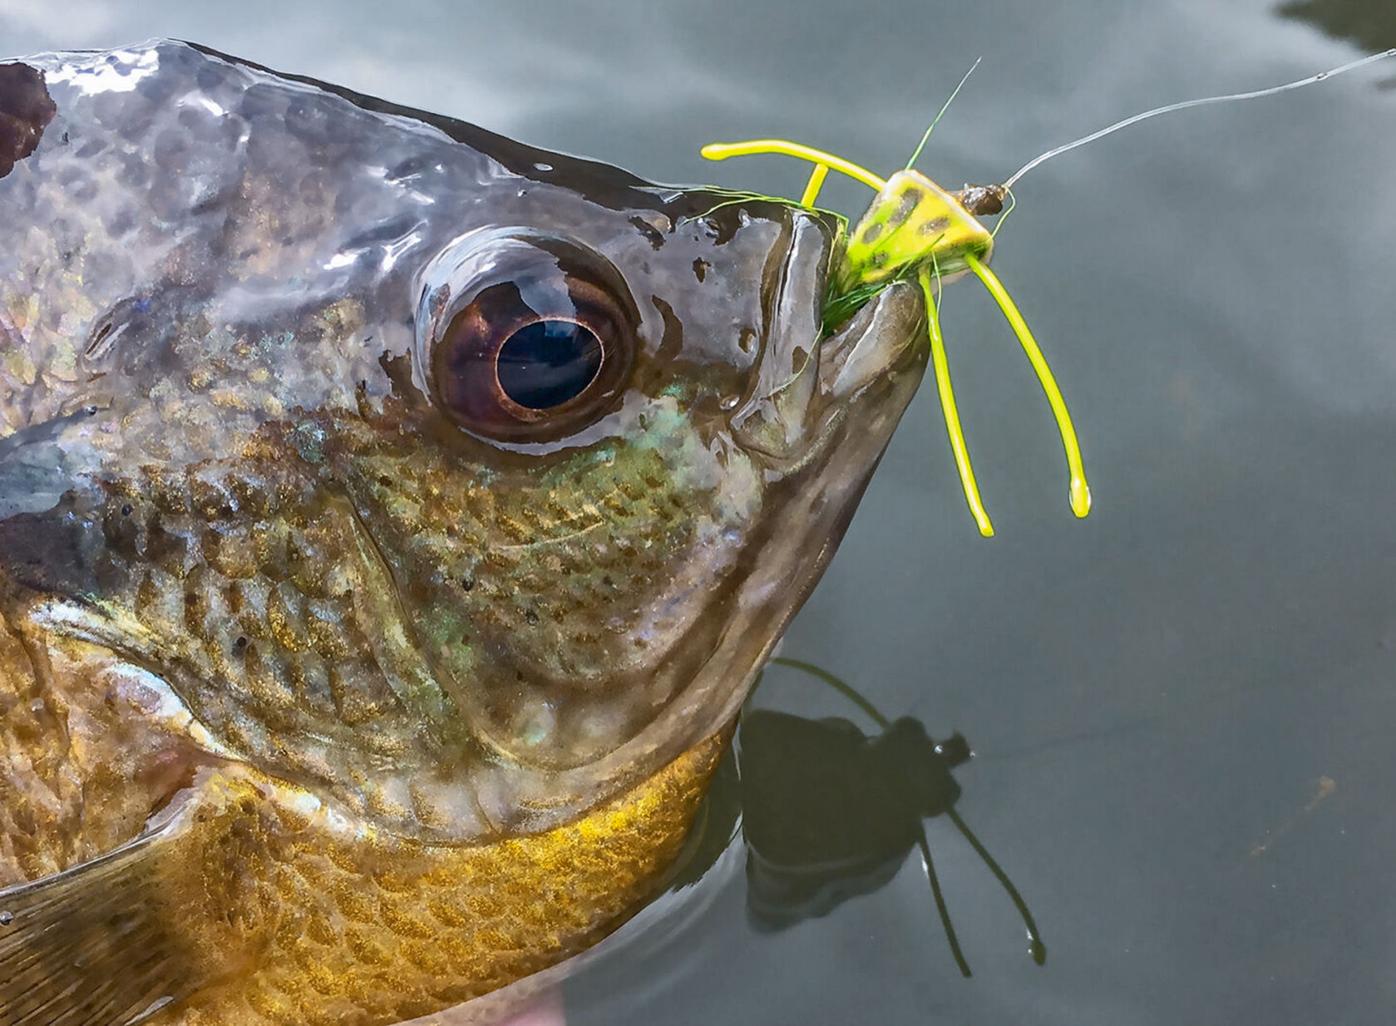 Bream on fly: You don't need big fish to have big fun